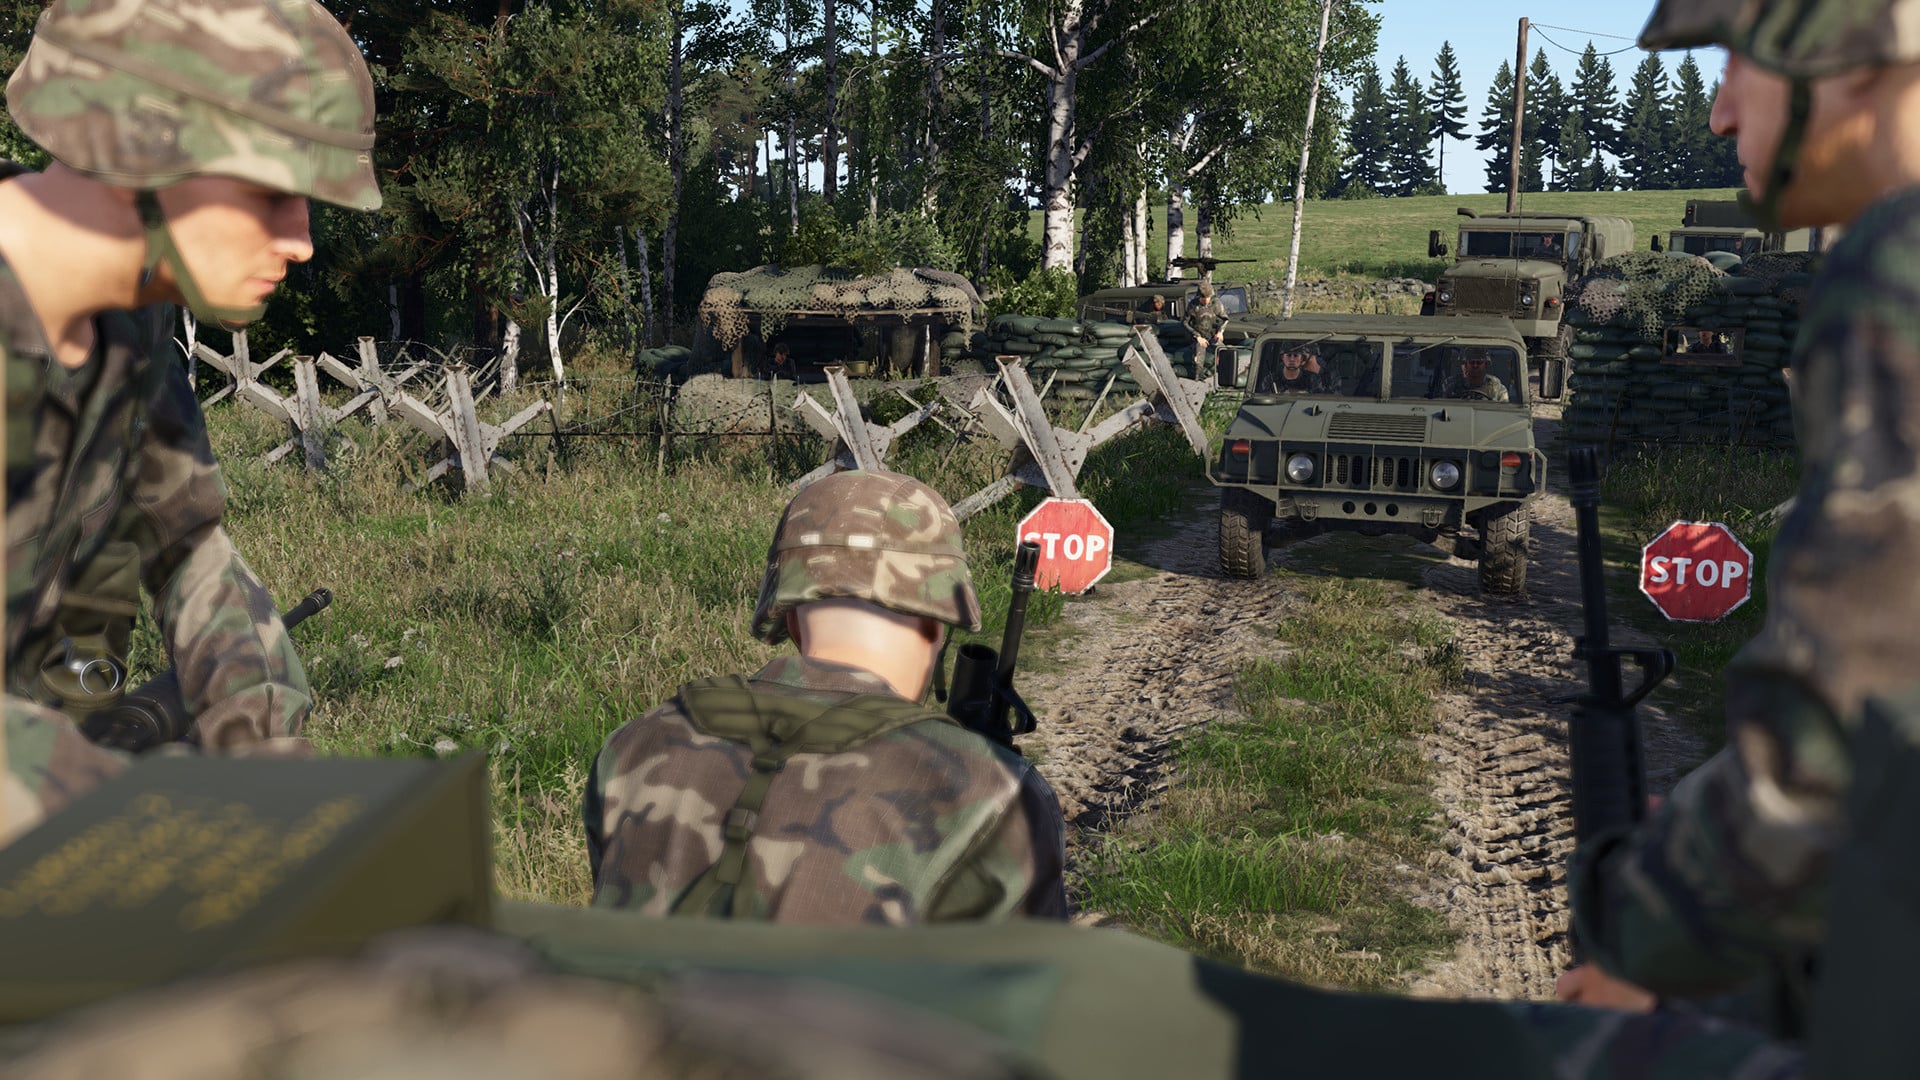 King of the Hill ARMA 3 Servers, monitoring